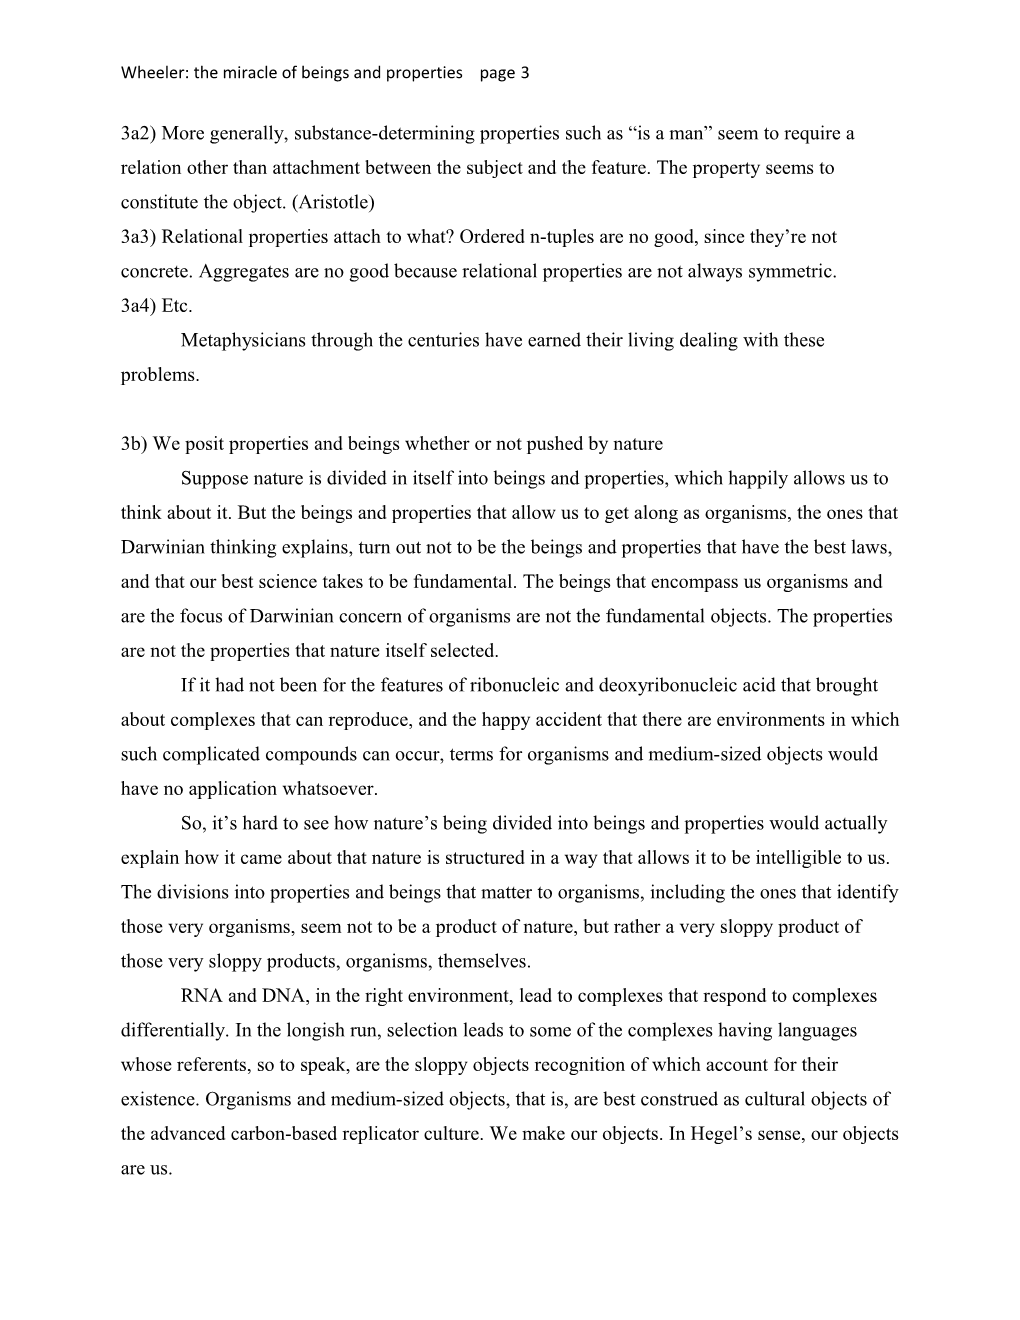 Wheeler: the Miracle of Beings and Properties Page 1